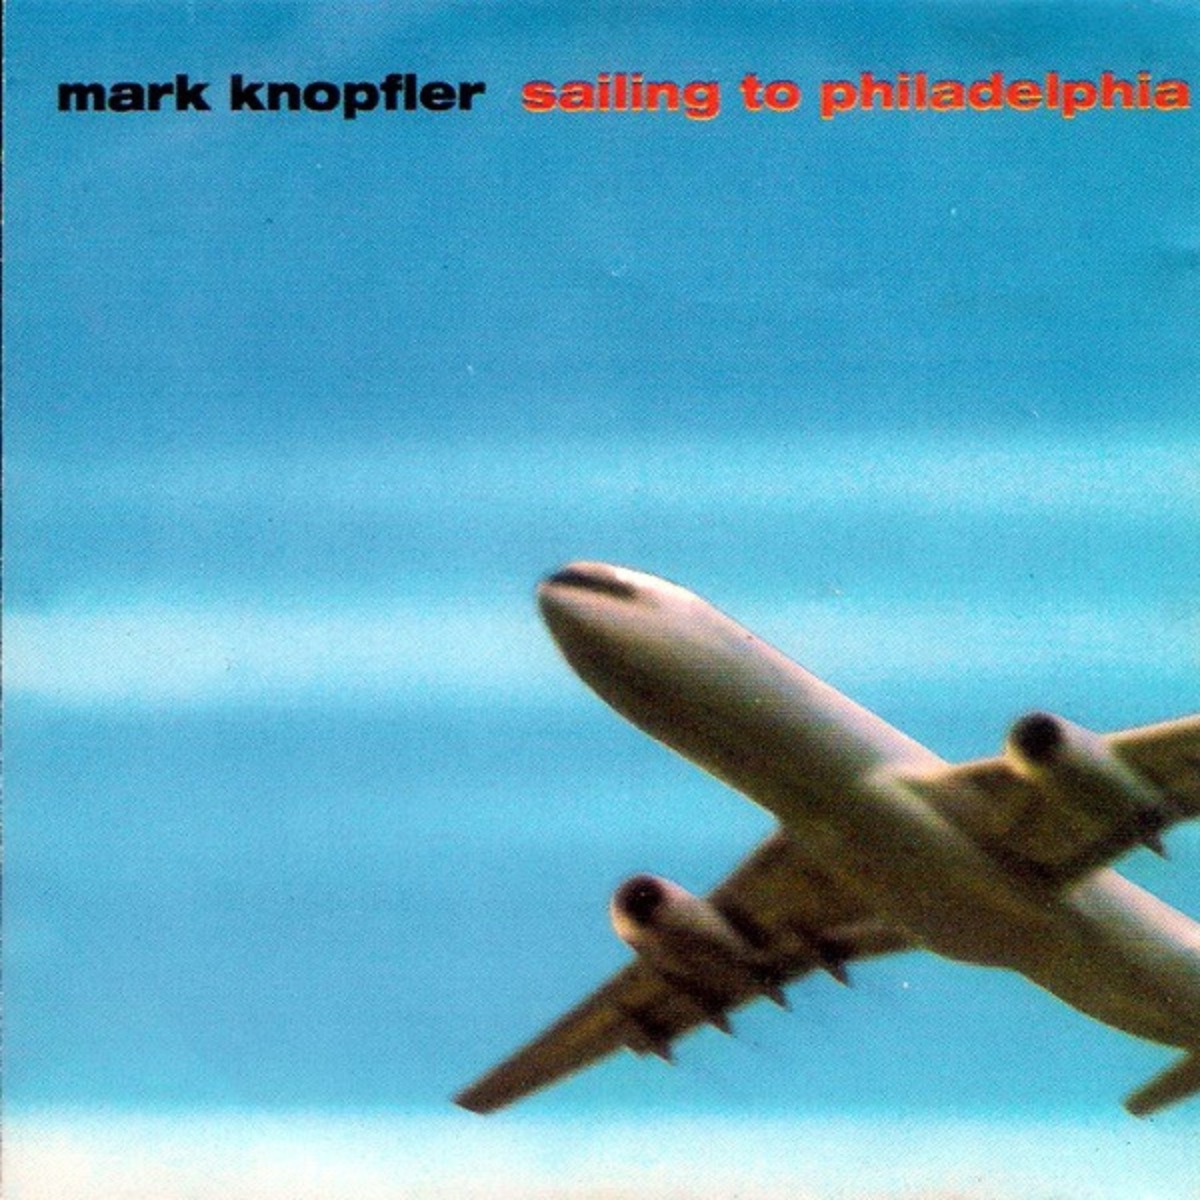 Cover of "Sailing to Philadelphia" by Mark Knopfler